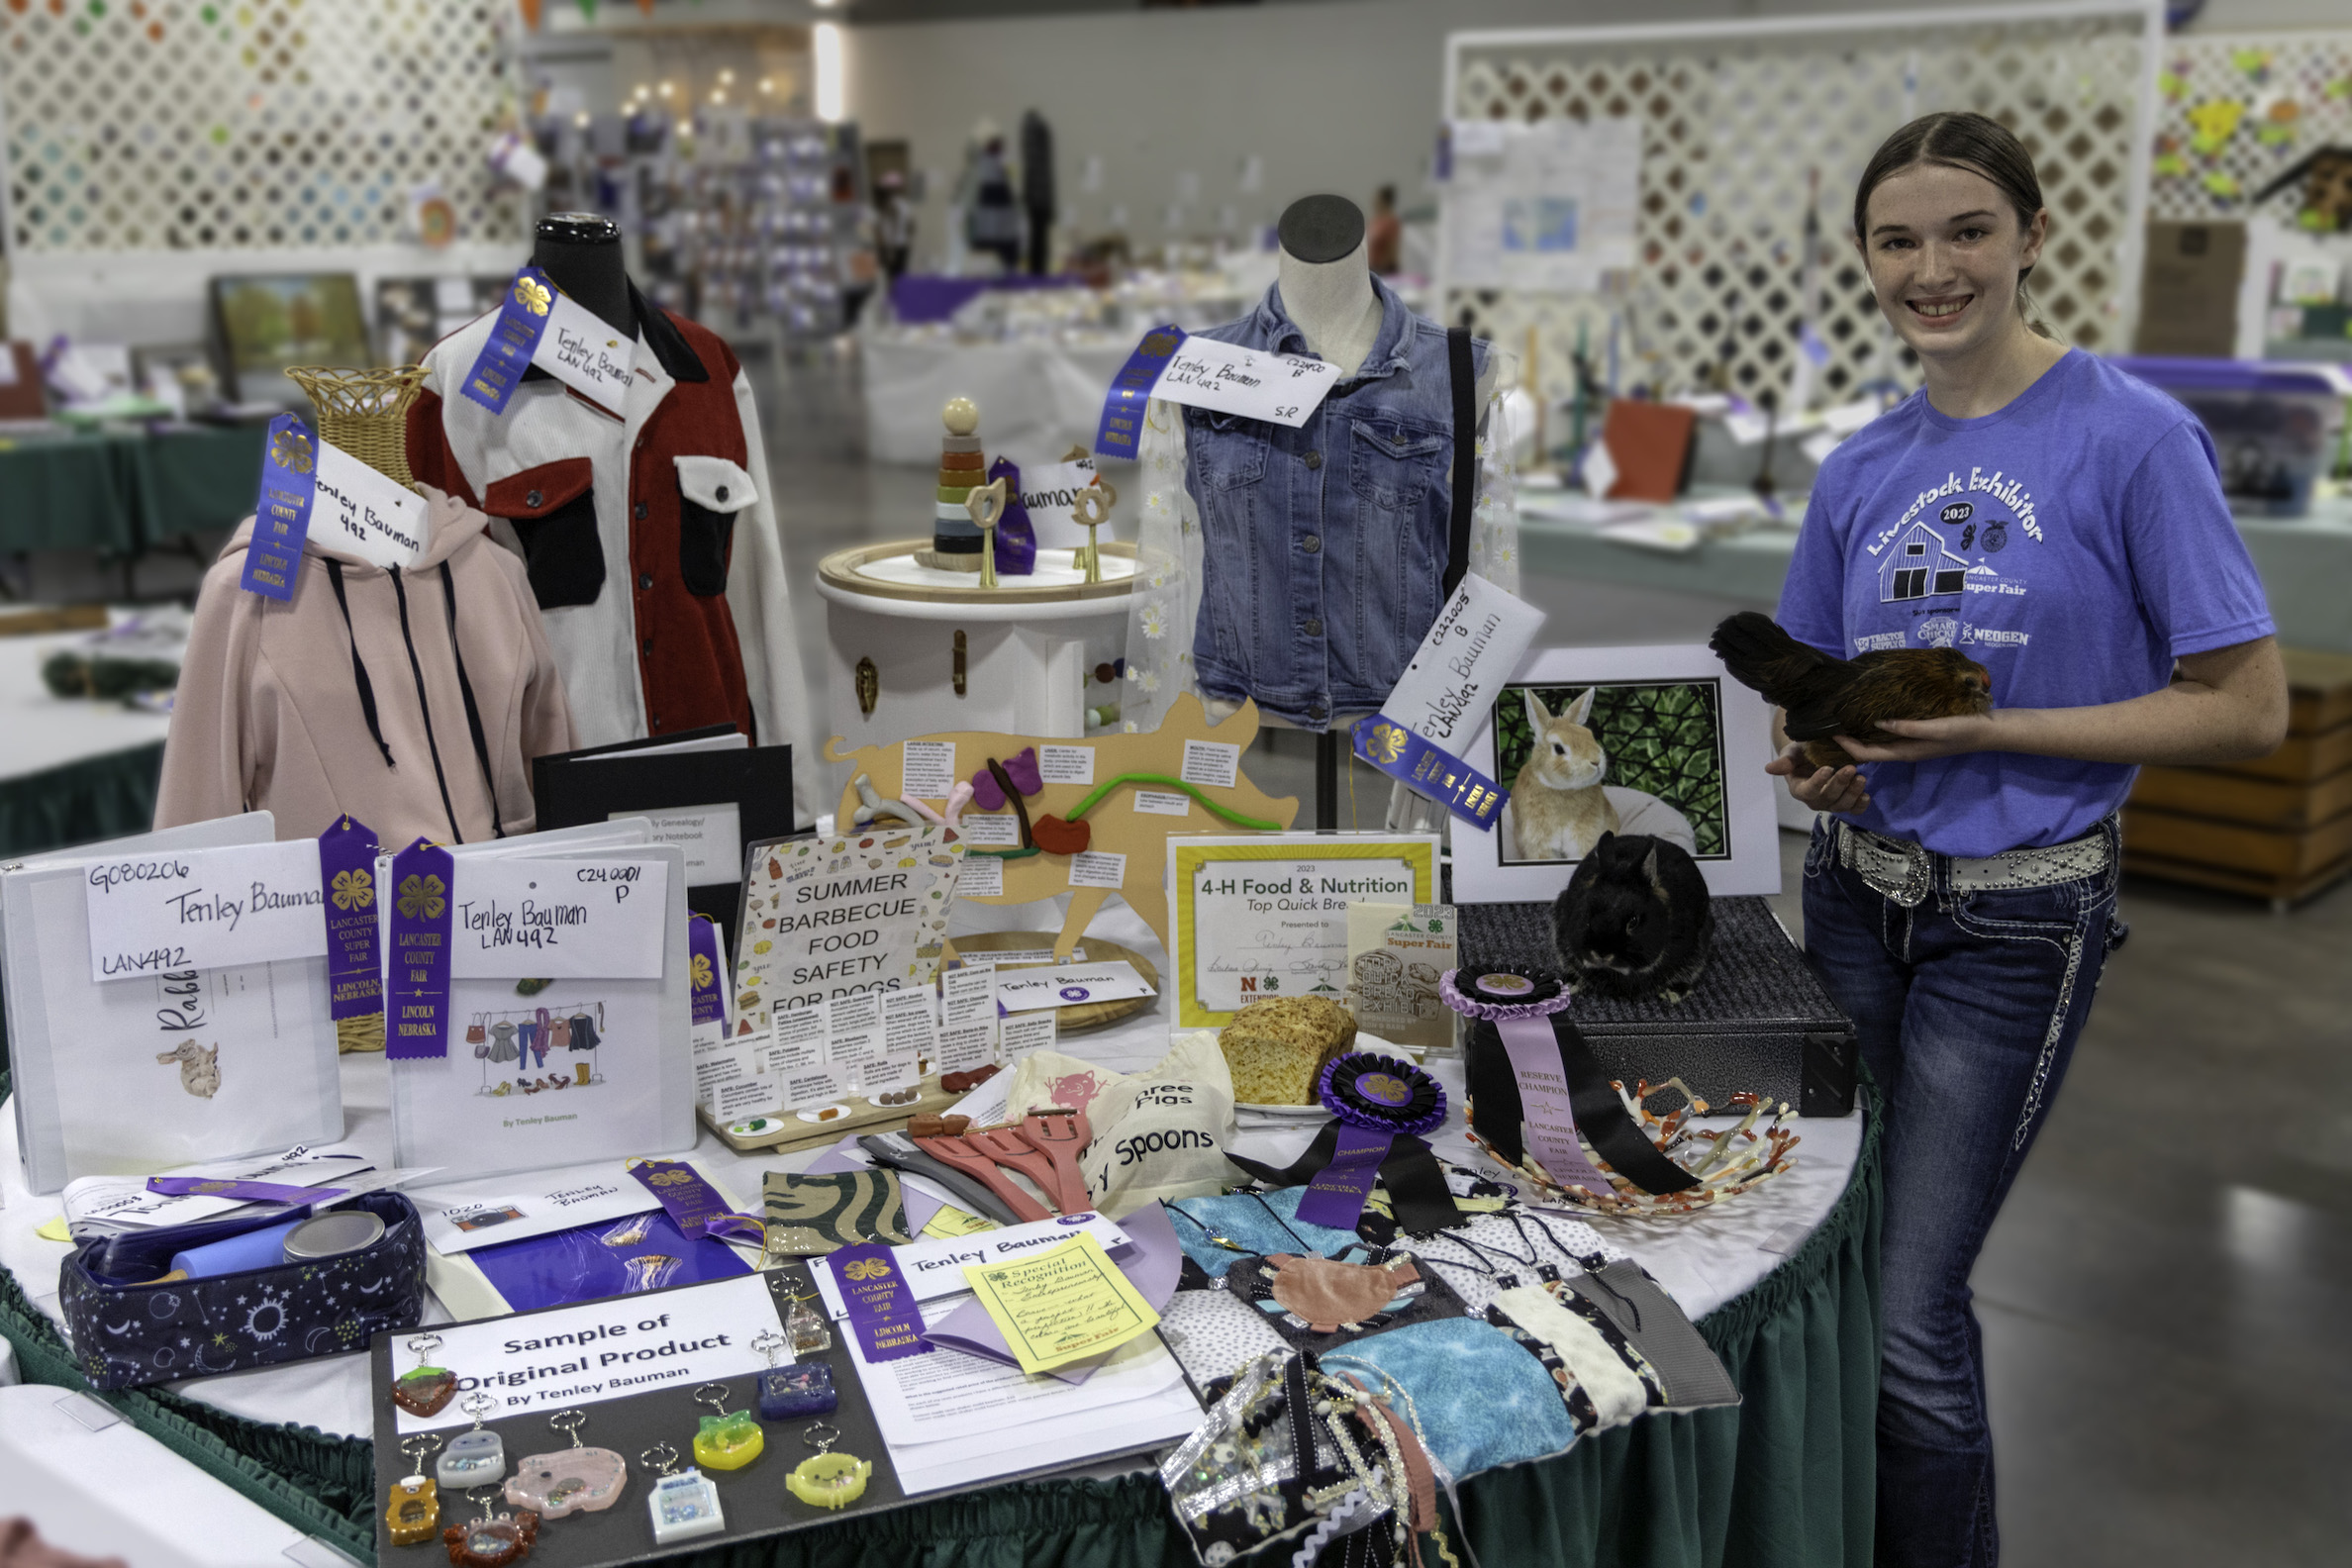 13-Year-Old Tenley Bauman Embraces 4-H Learning Experience at Fairs